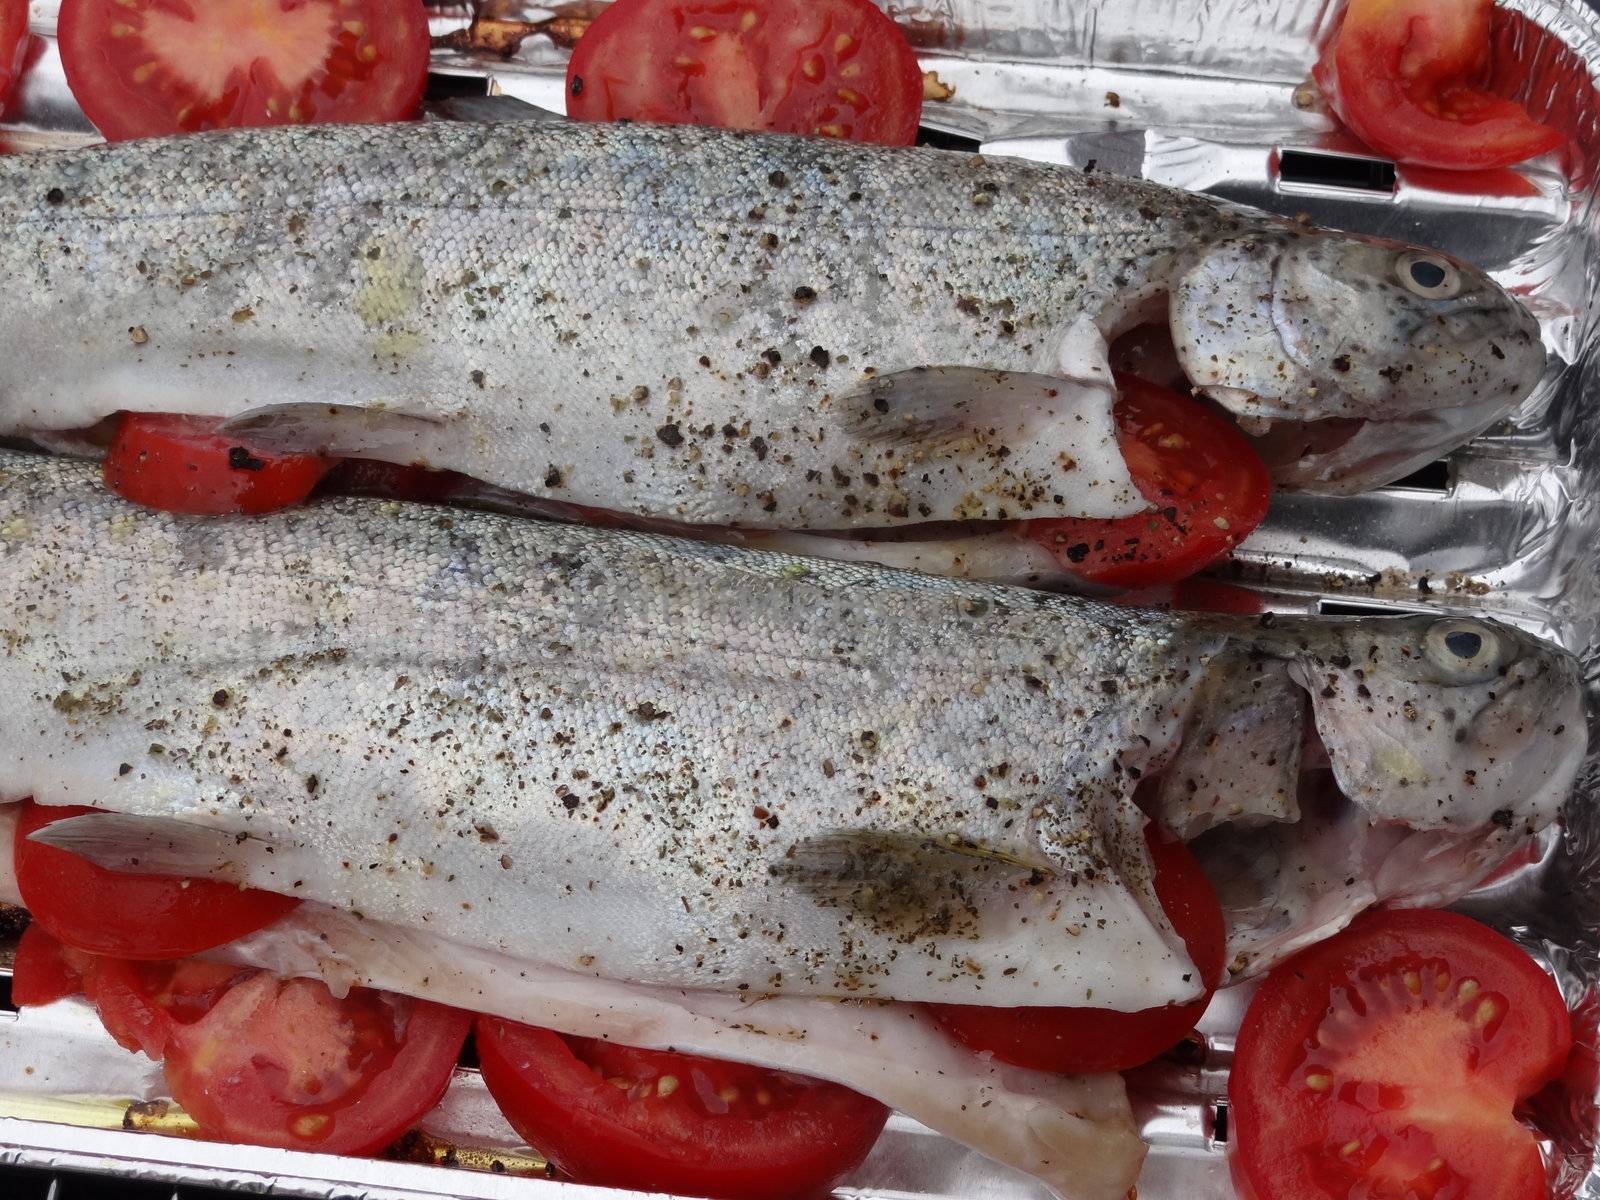 Two rainbow trouts on grill with tomatoes